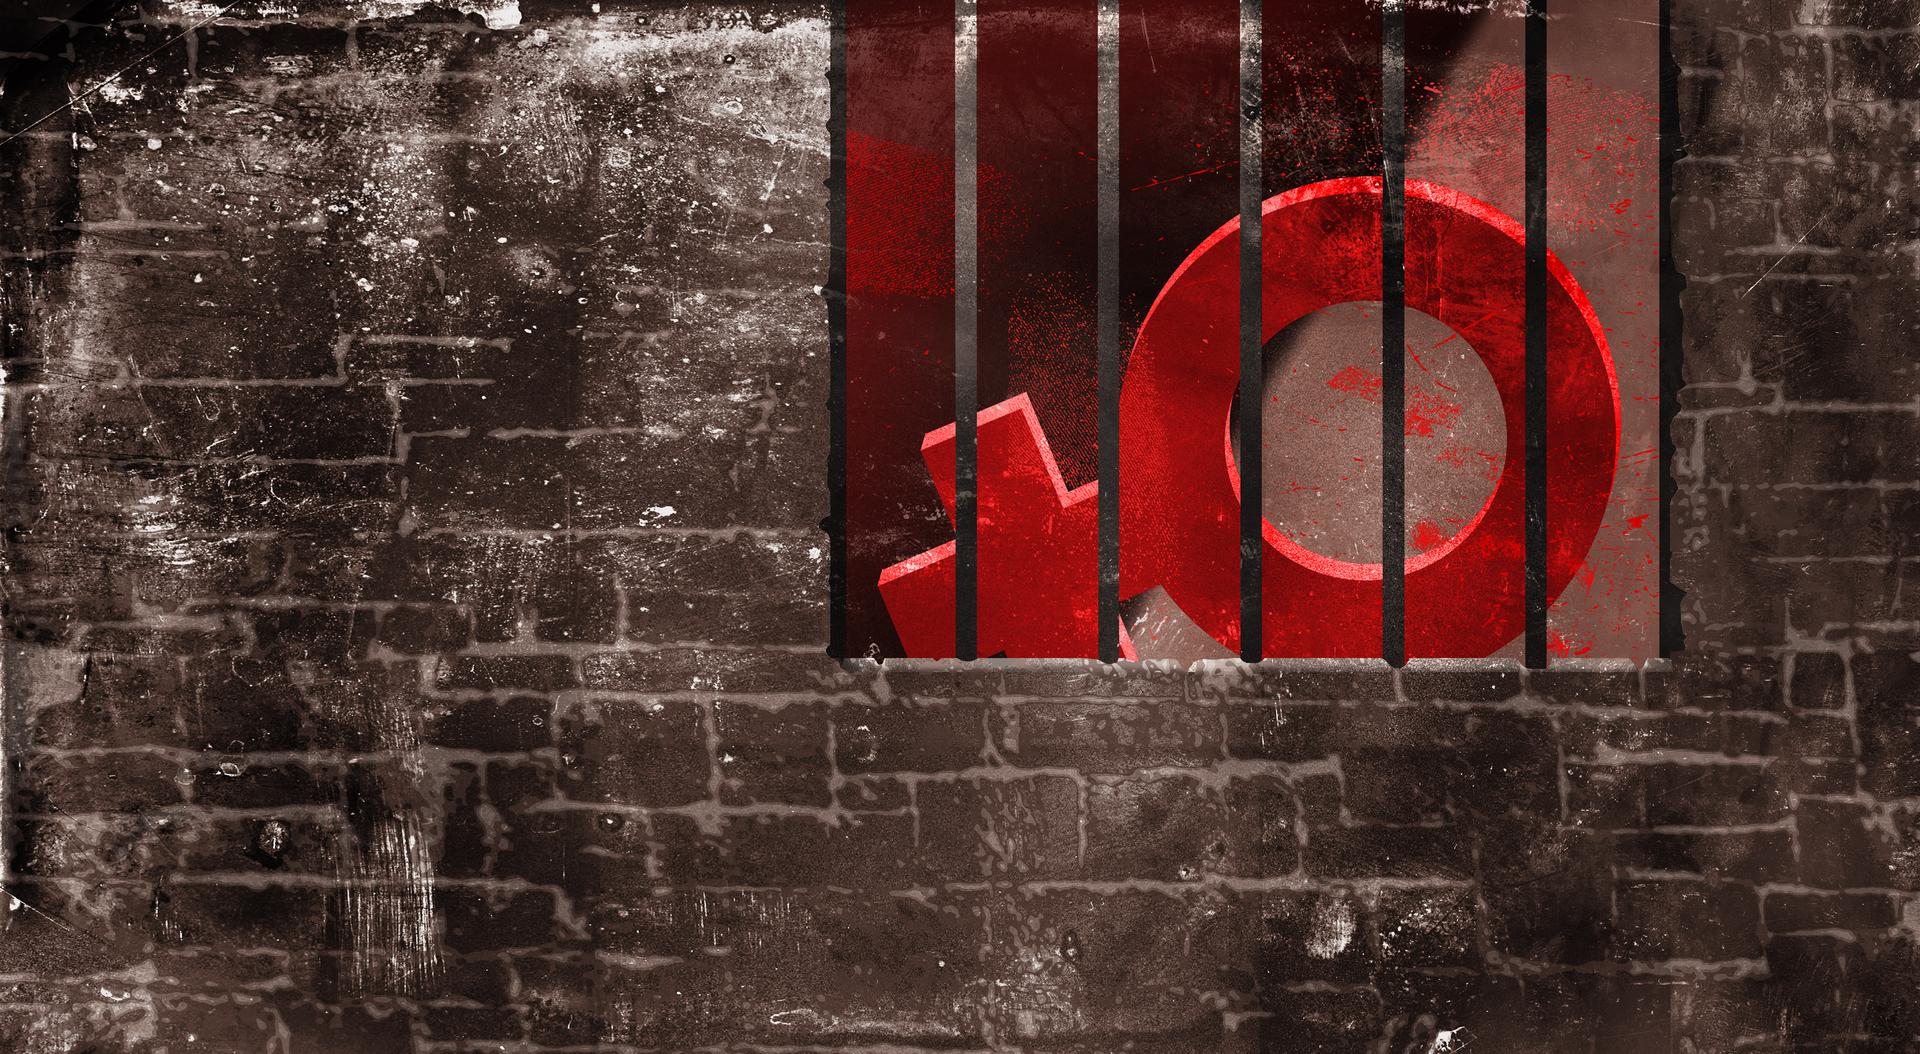 The icon for female is behind bars surrounded by a brick wall.